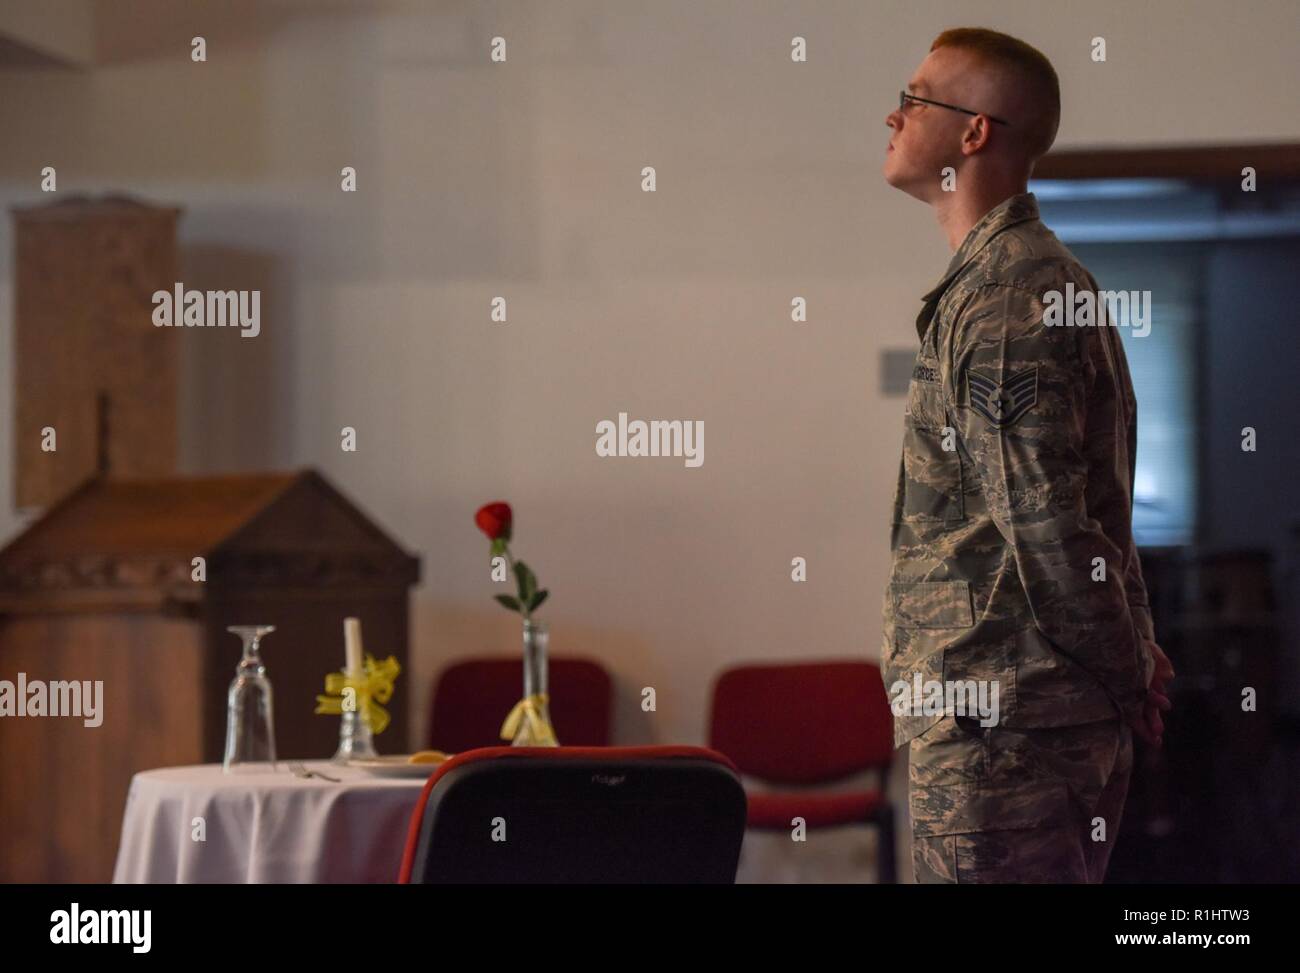 U.S. Air Force Staff Sgt. Carter Lancaster, 39th Logistics Readiness Squadron unit security manager, guards the POW/MIA table during the POW/MIA ceremony at Incirlik Air Base, Turkey, Sept. 20, 2018. The POW/MIA table is smaller than others, representing the frailty one prisoner faces alone against his or her oppressors. Stock Photo